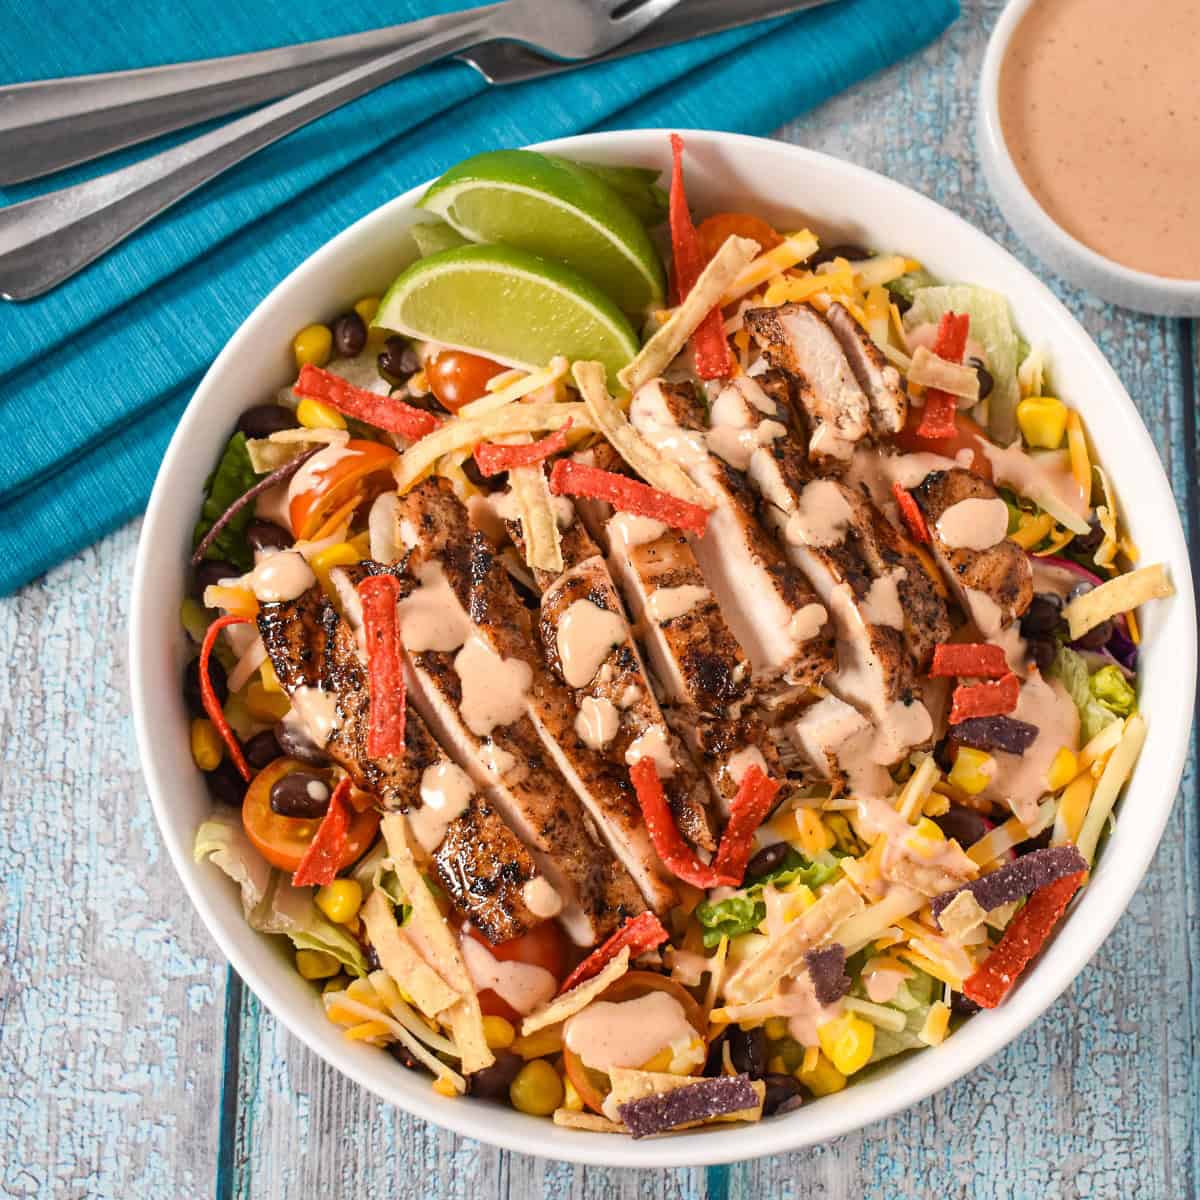 The grilled chicken southwest salad finished and dressed with the chipotle dressing in a white bowl.